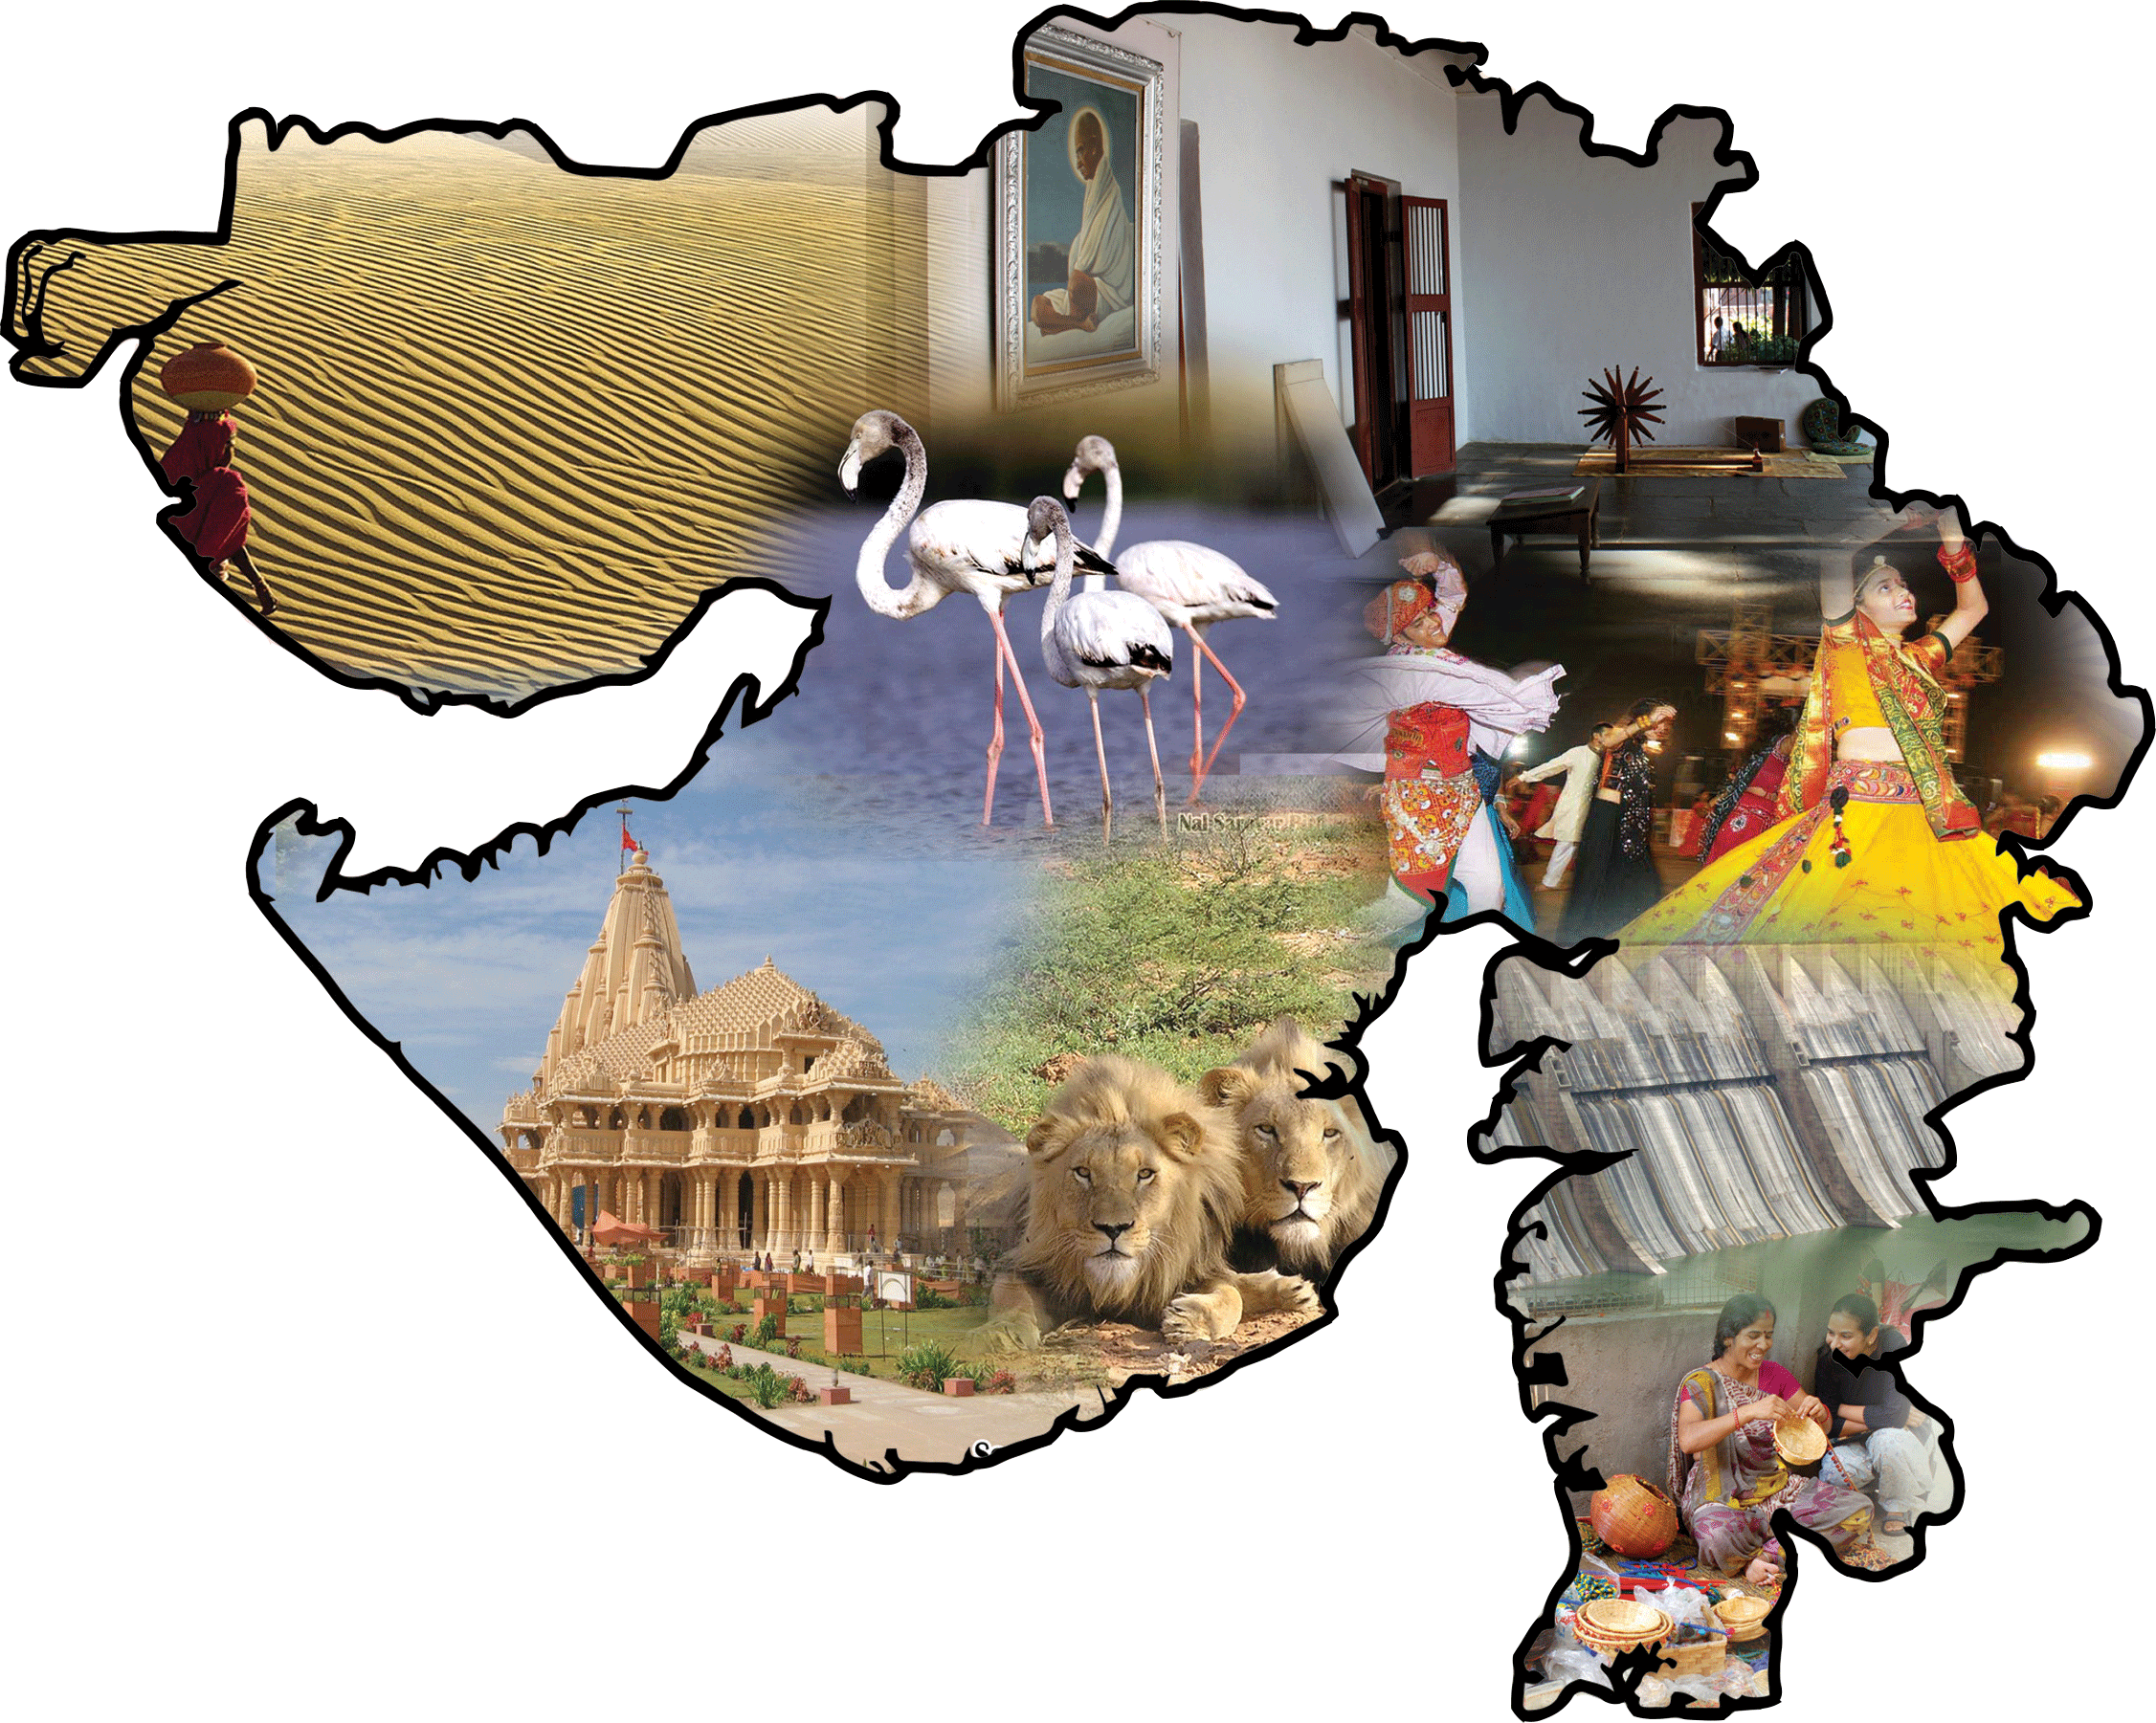 festival clipart country india